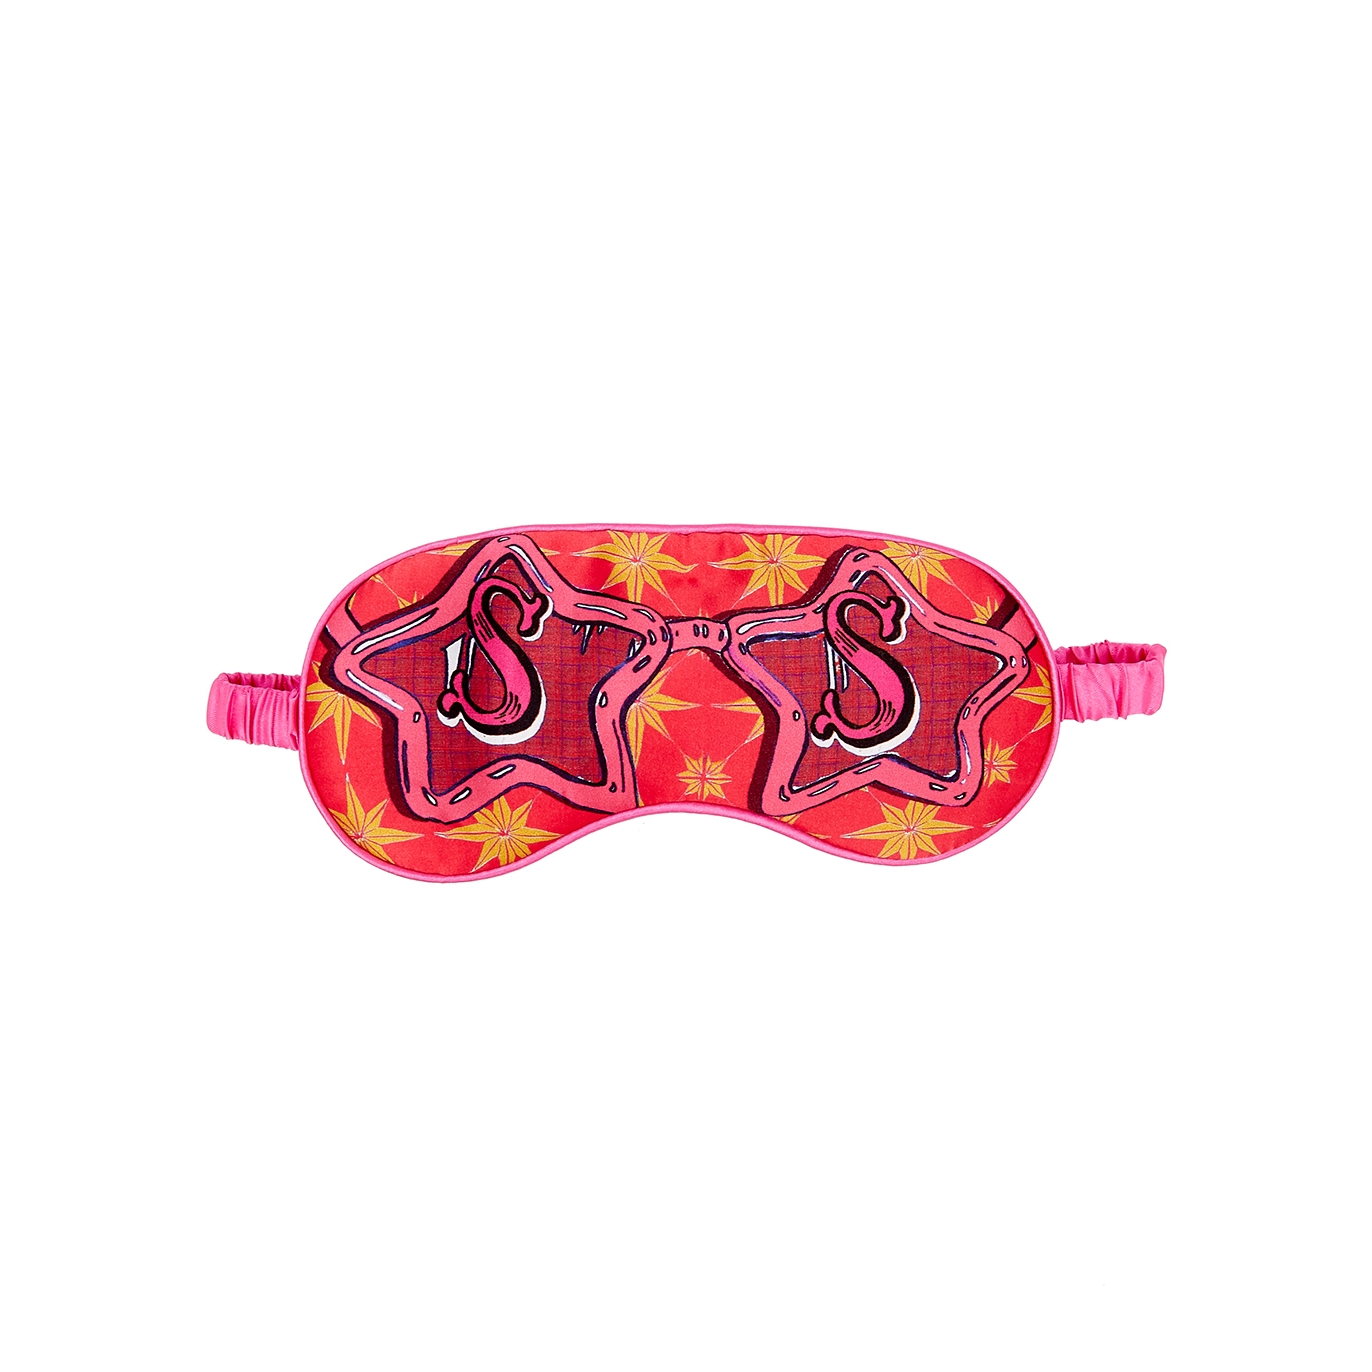 Jessica Russell Flint S Is For Sunglasses Silk Eye Mask